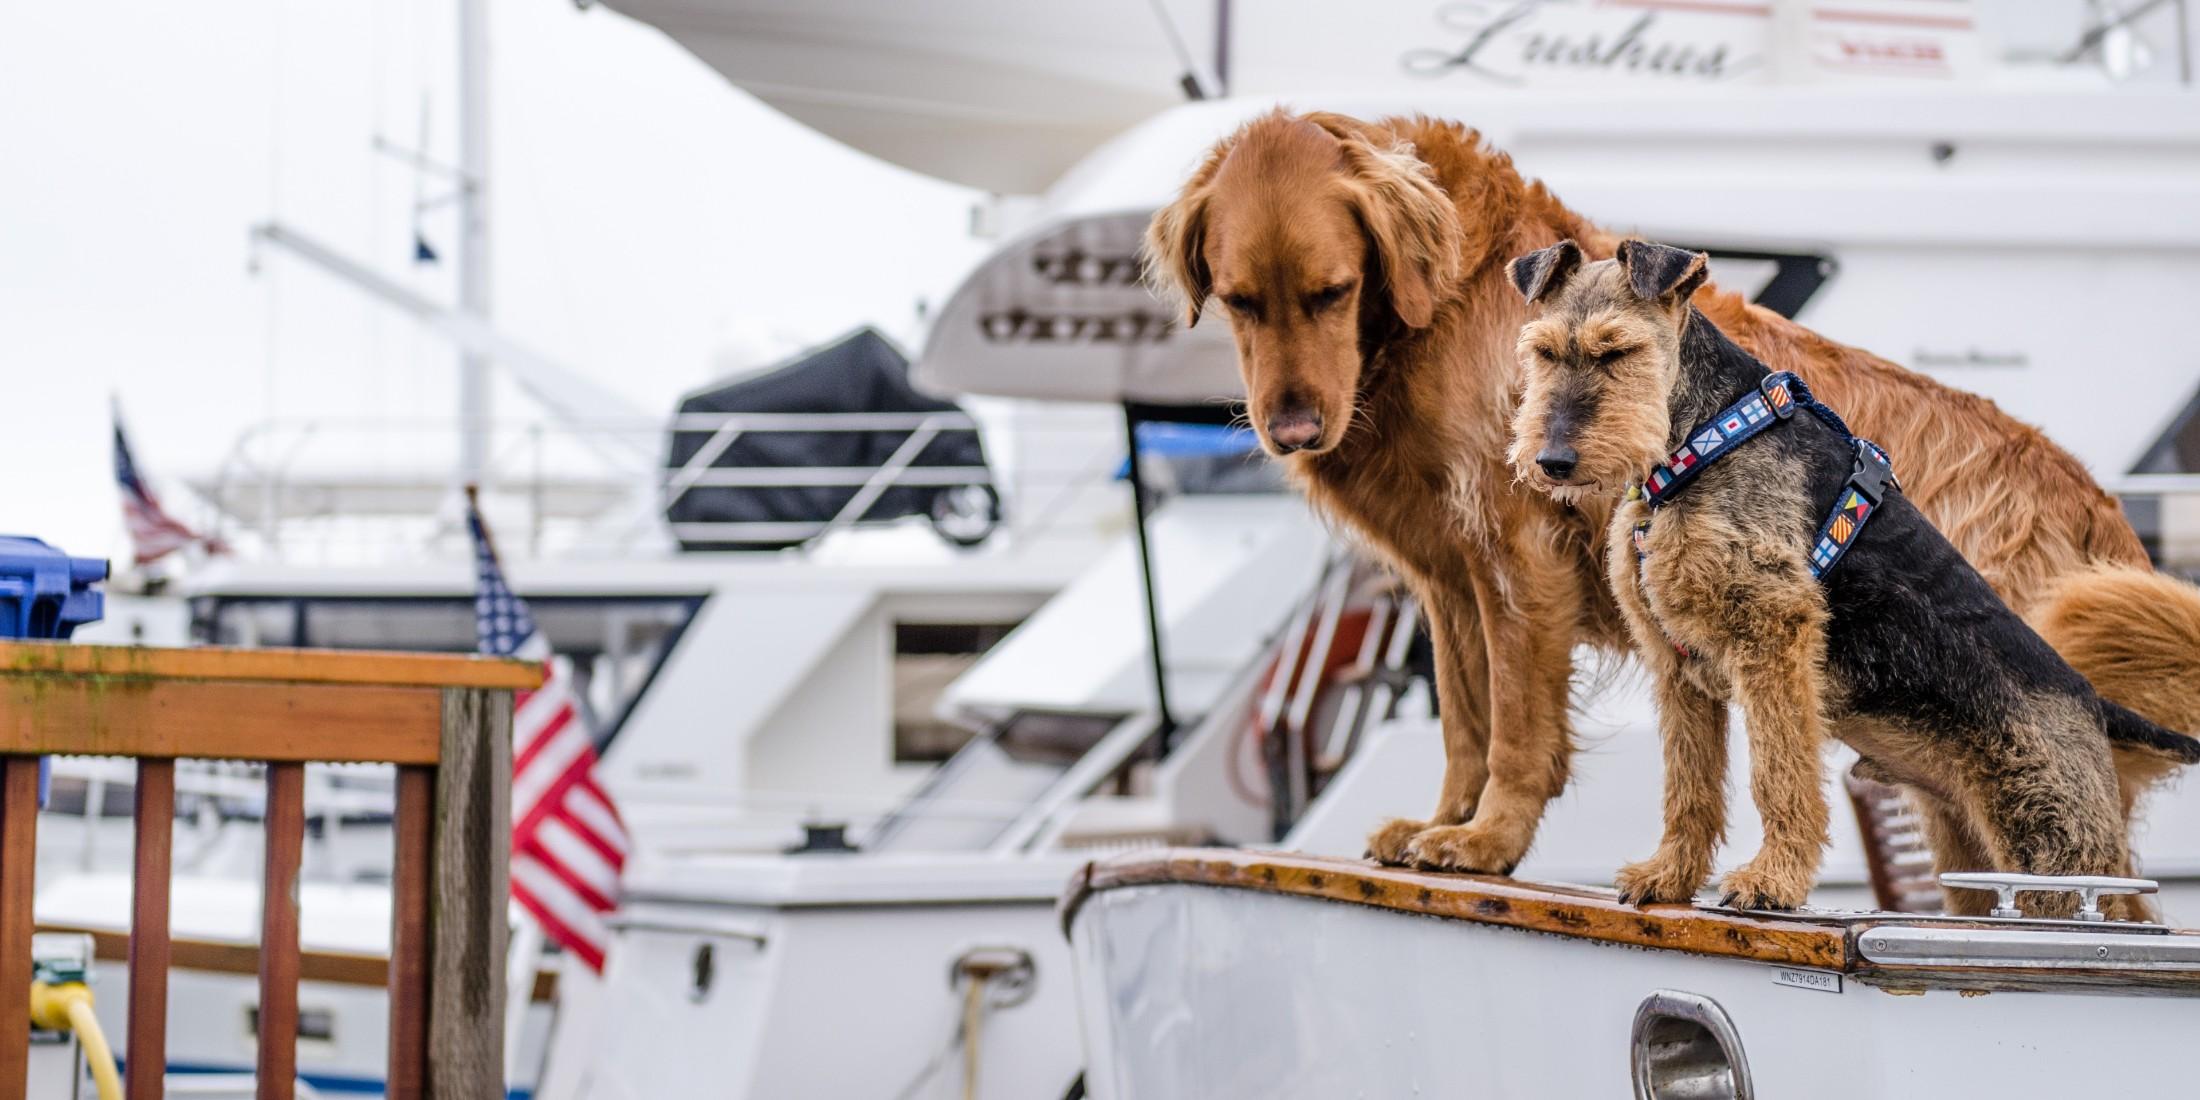 Who’s a Good "Buoy?" 7 Sailing Trips to Take With Fido